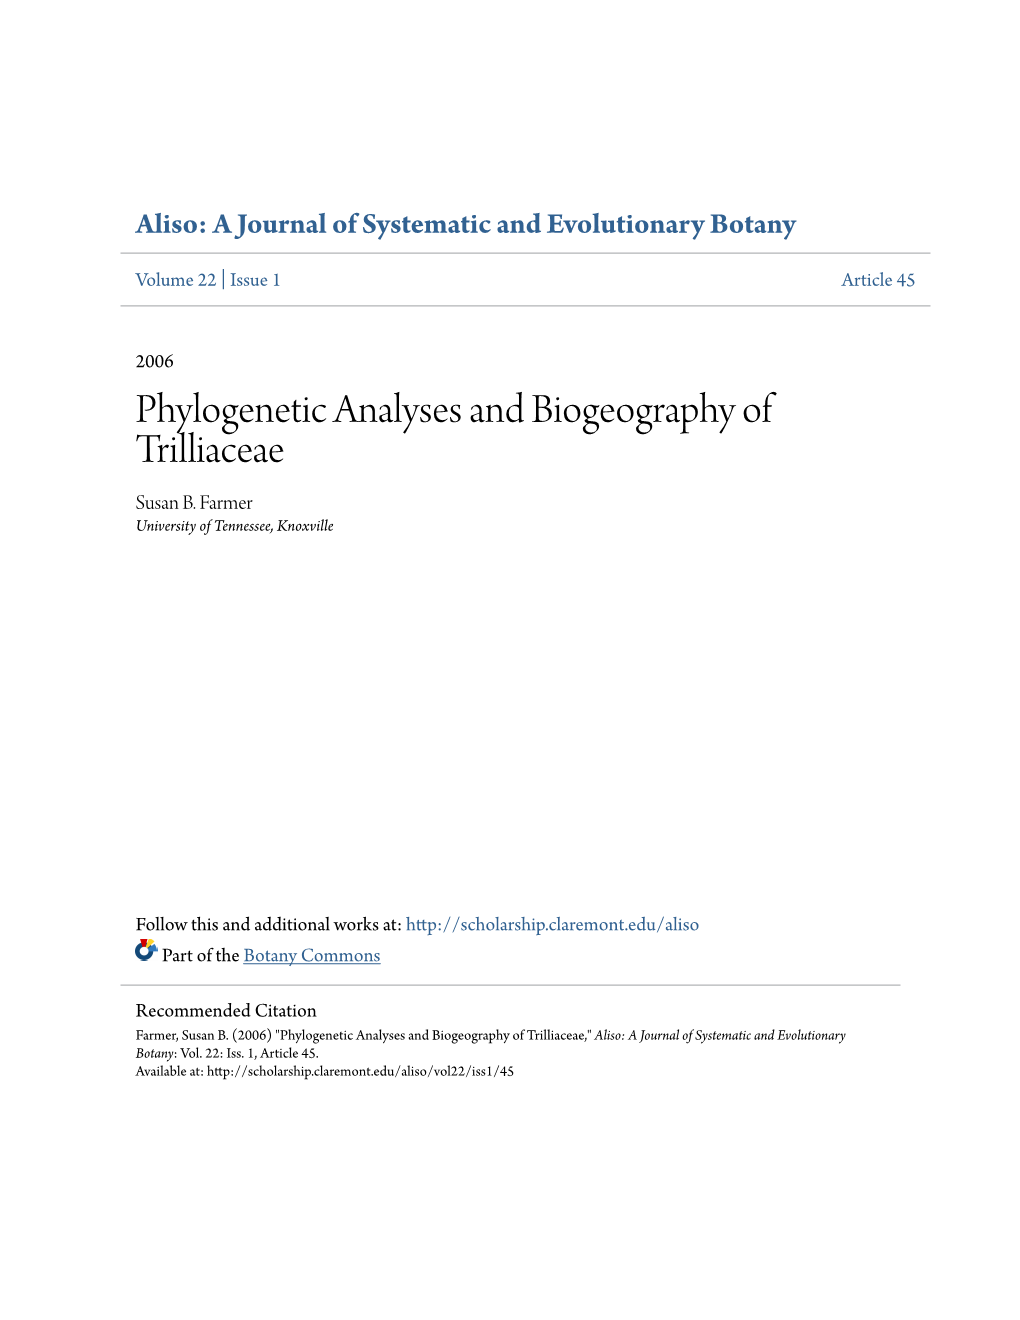 Phylogenetic Analyses and Biogeography of Trilliaceae Susan B